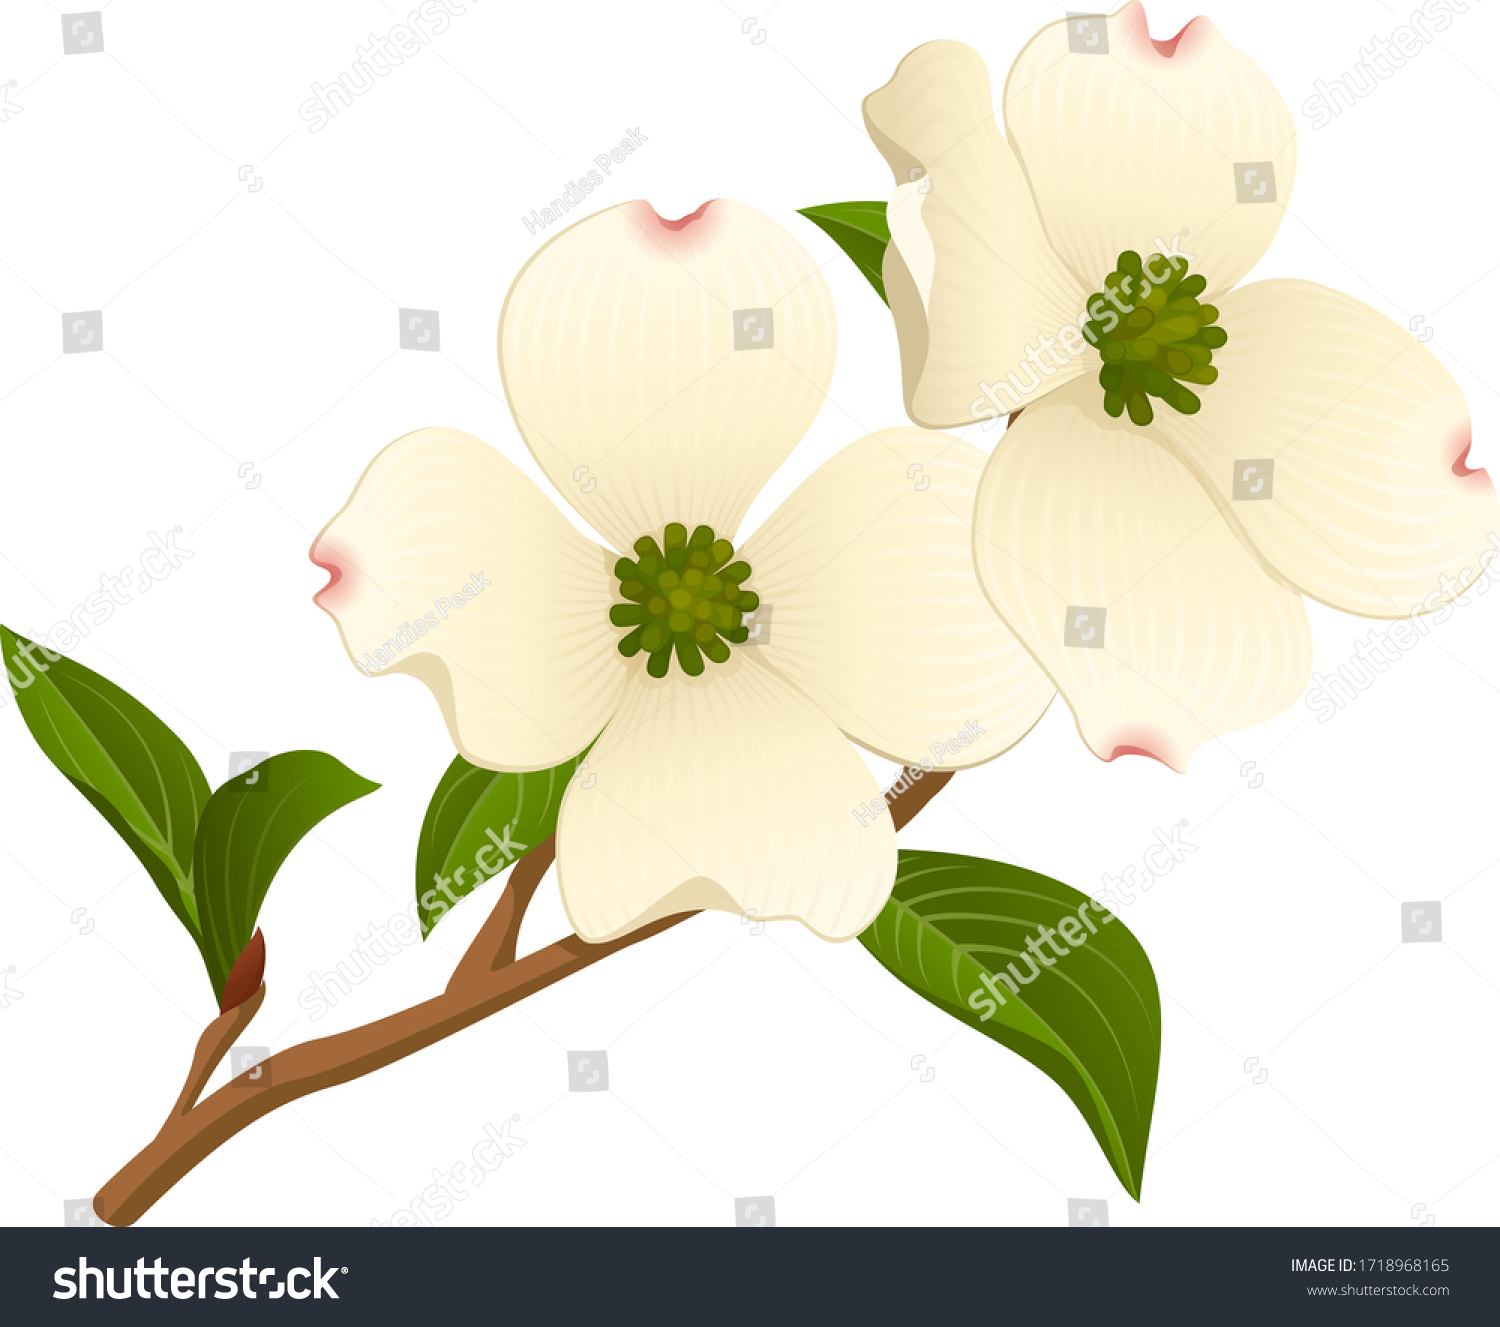 SVG of Vector illustration of a branch of a dogwood tree with two open flowers. svg